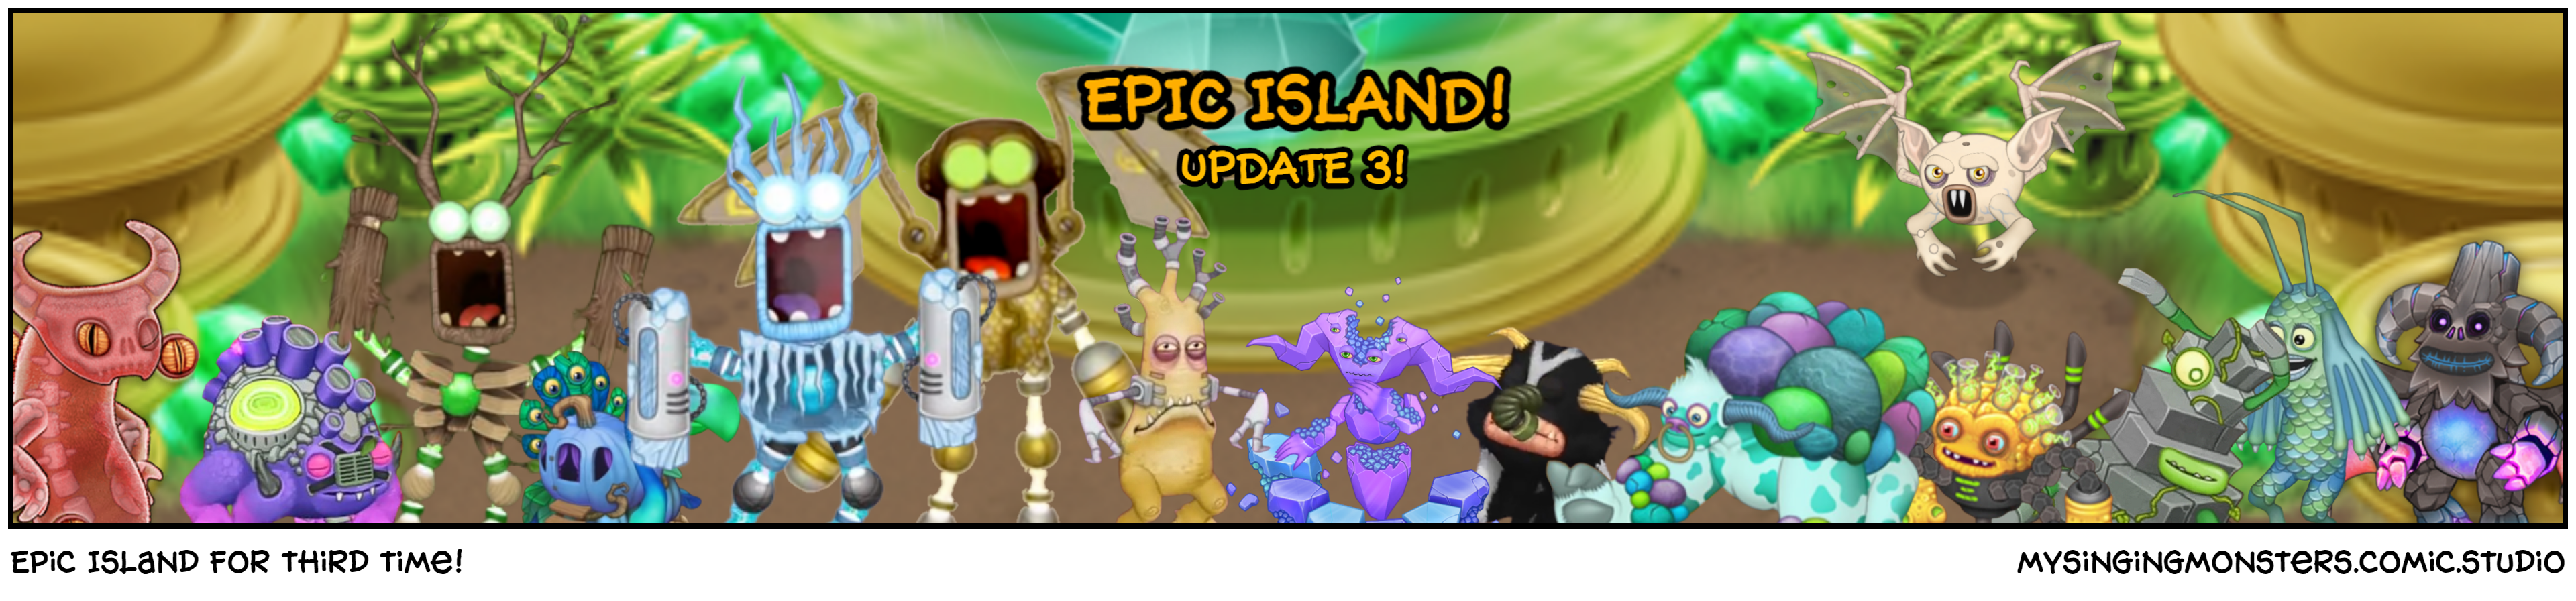 Epic Island for third time!